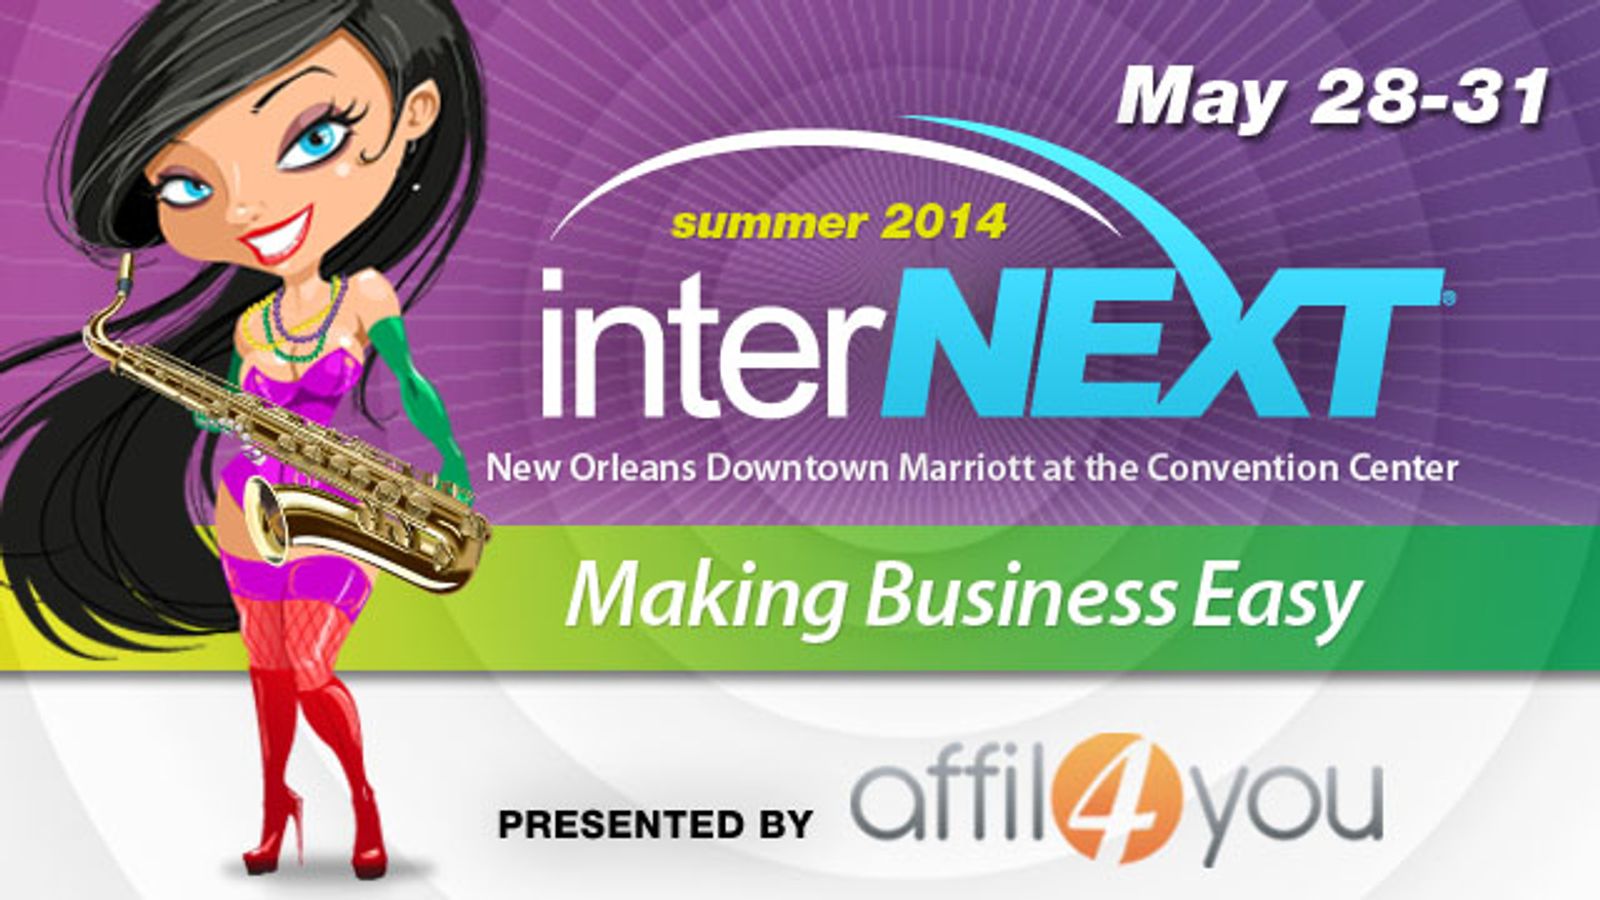 Affil4You is Presenting Sponsor at Internext New Orleans 2014